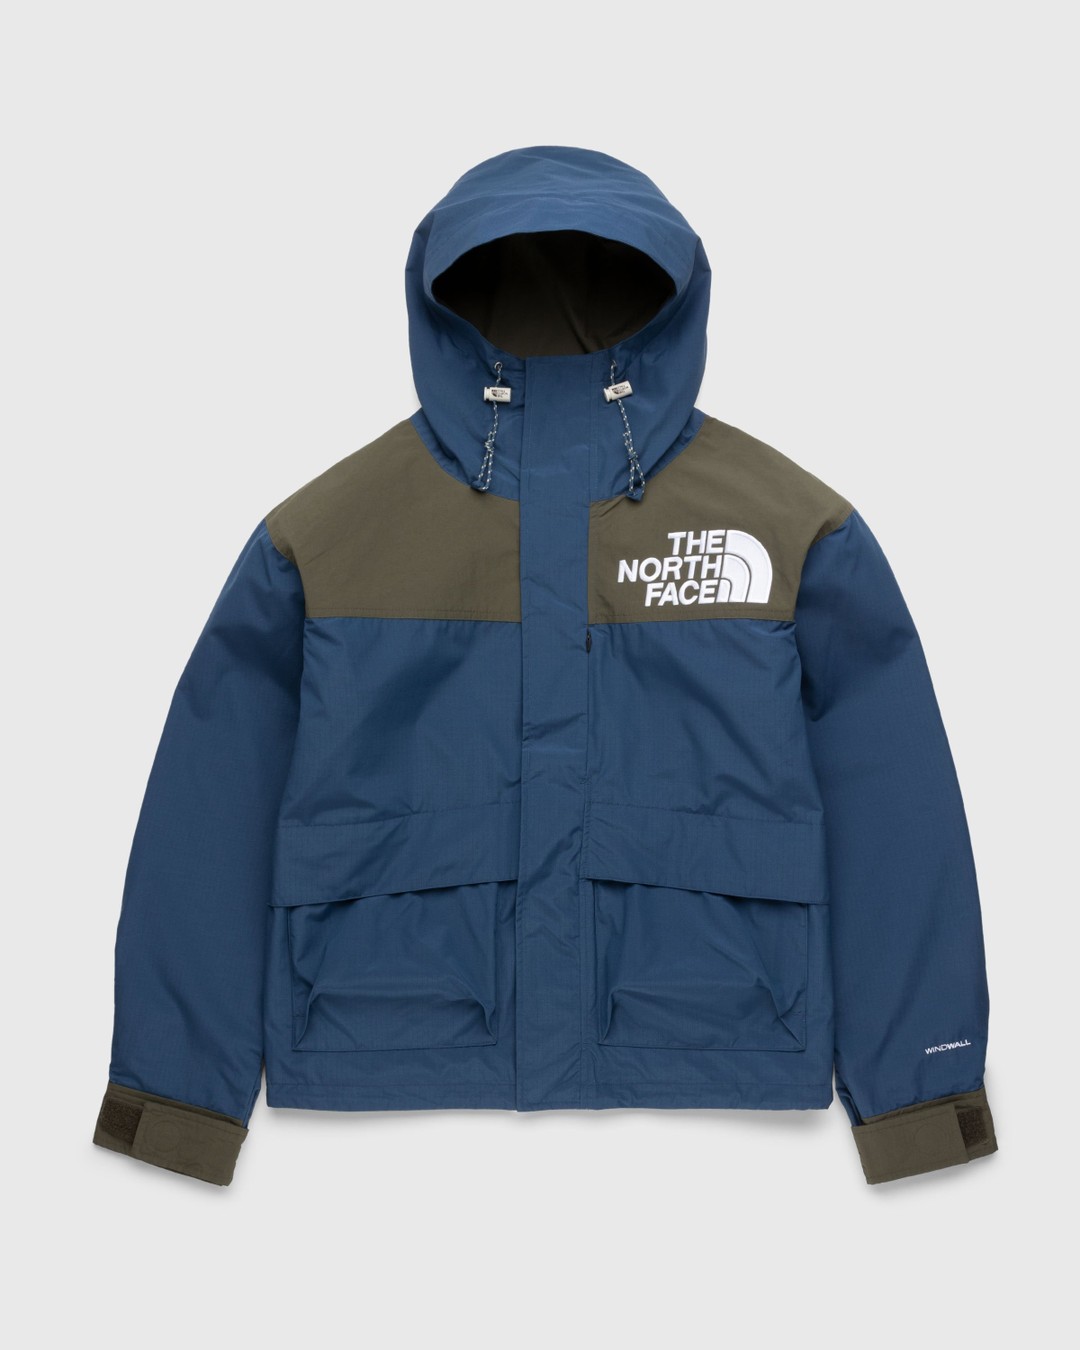 The North Face – ‘86 Low-Fi Hi-Tek Mountain Jacket Shady Blue/New Taupe Green - Windbreakers - Blue - Image 1